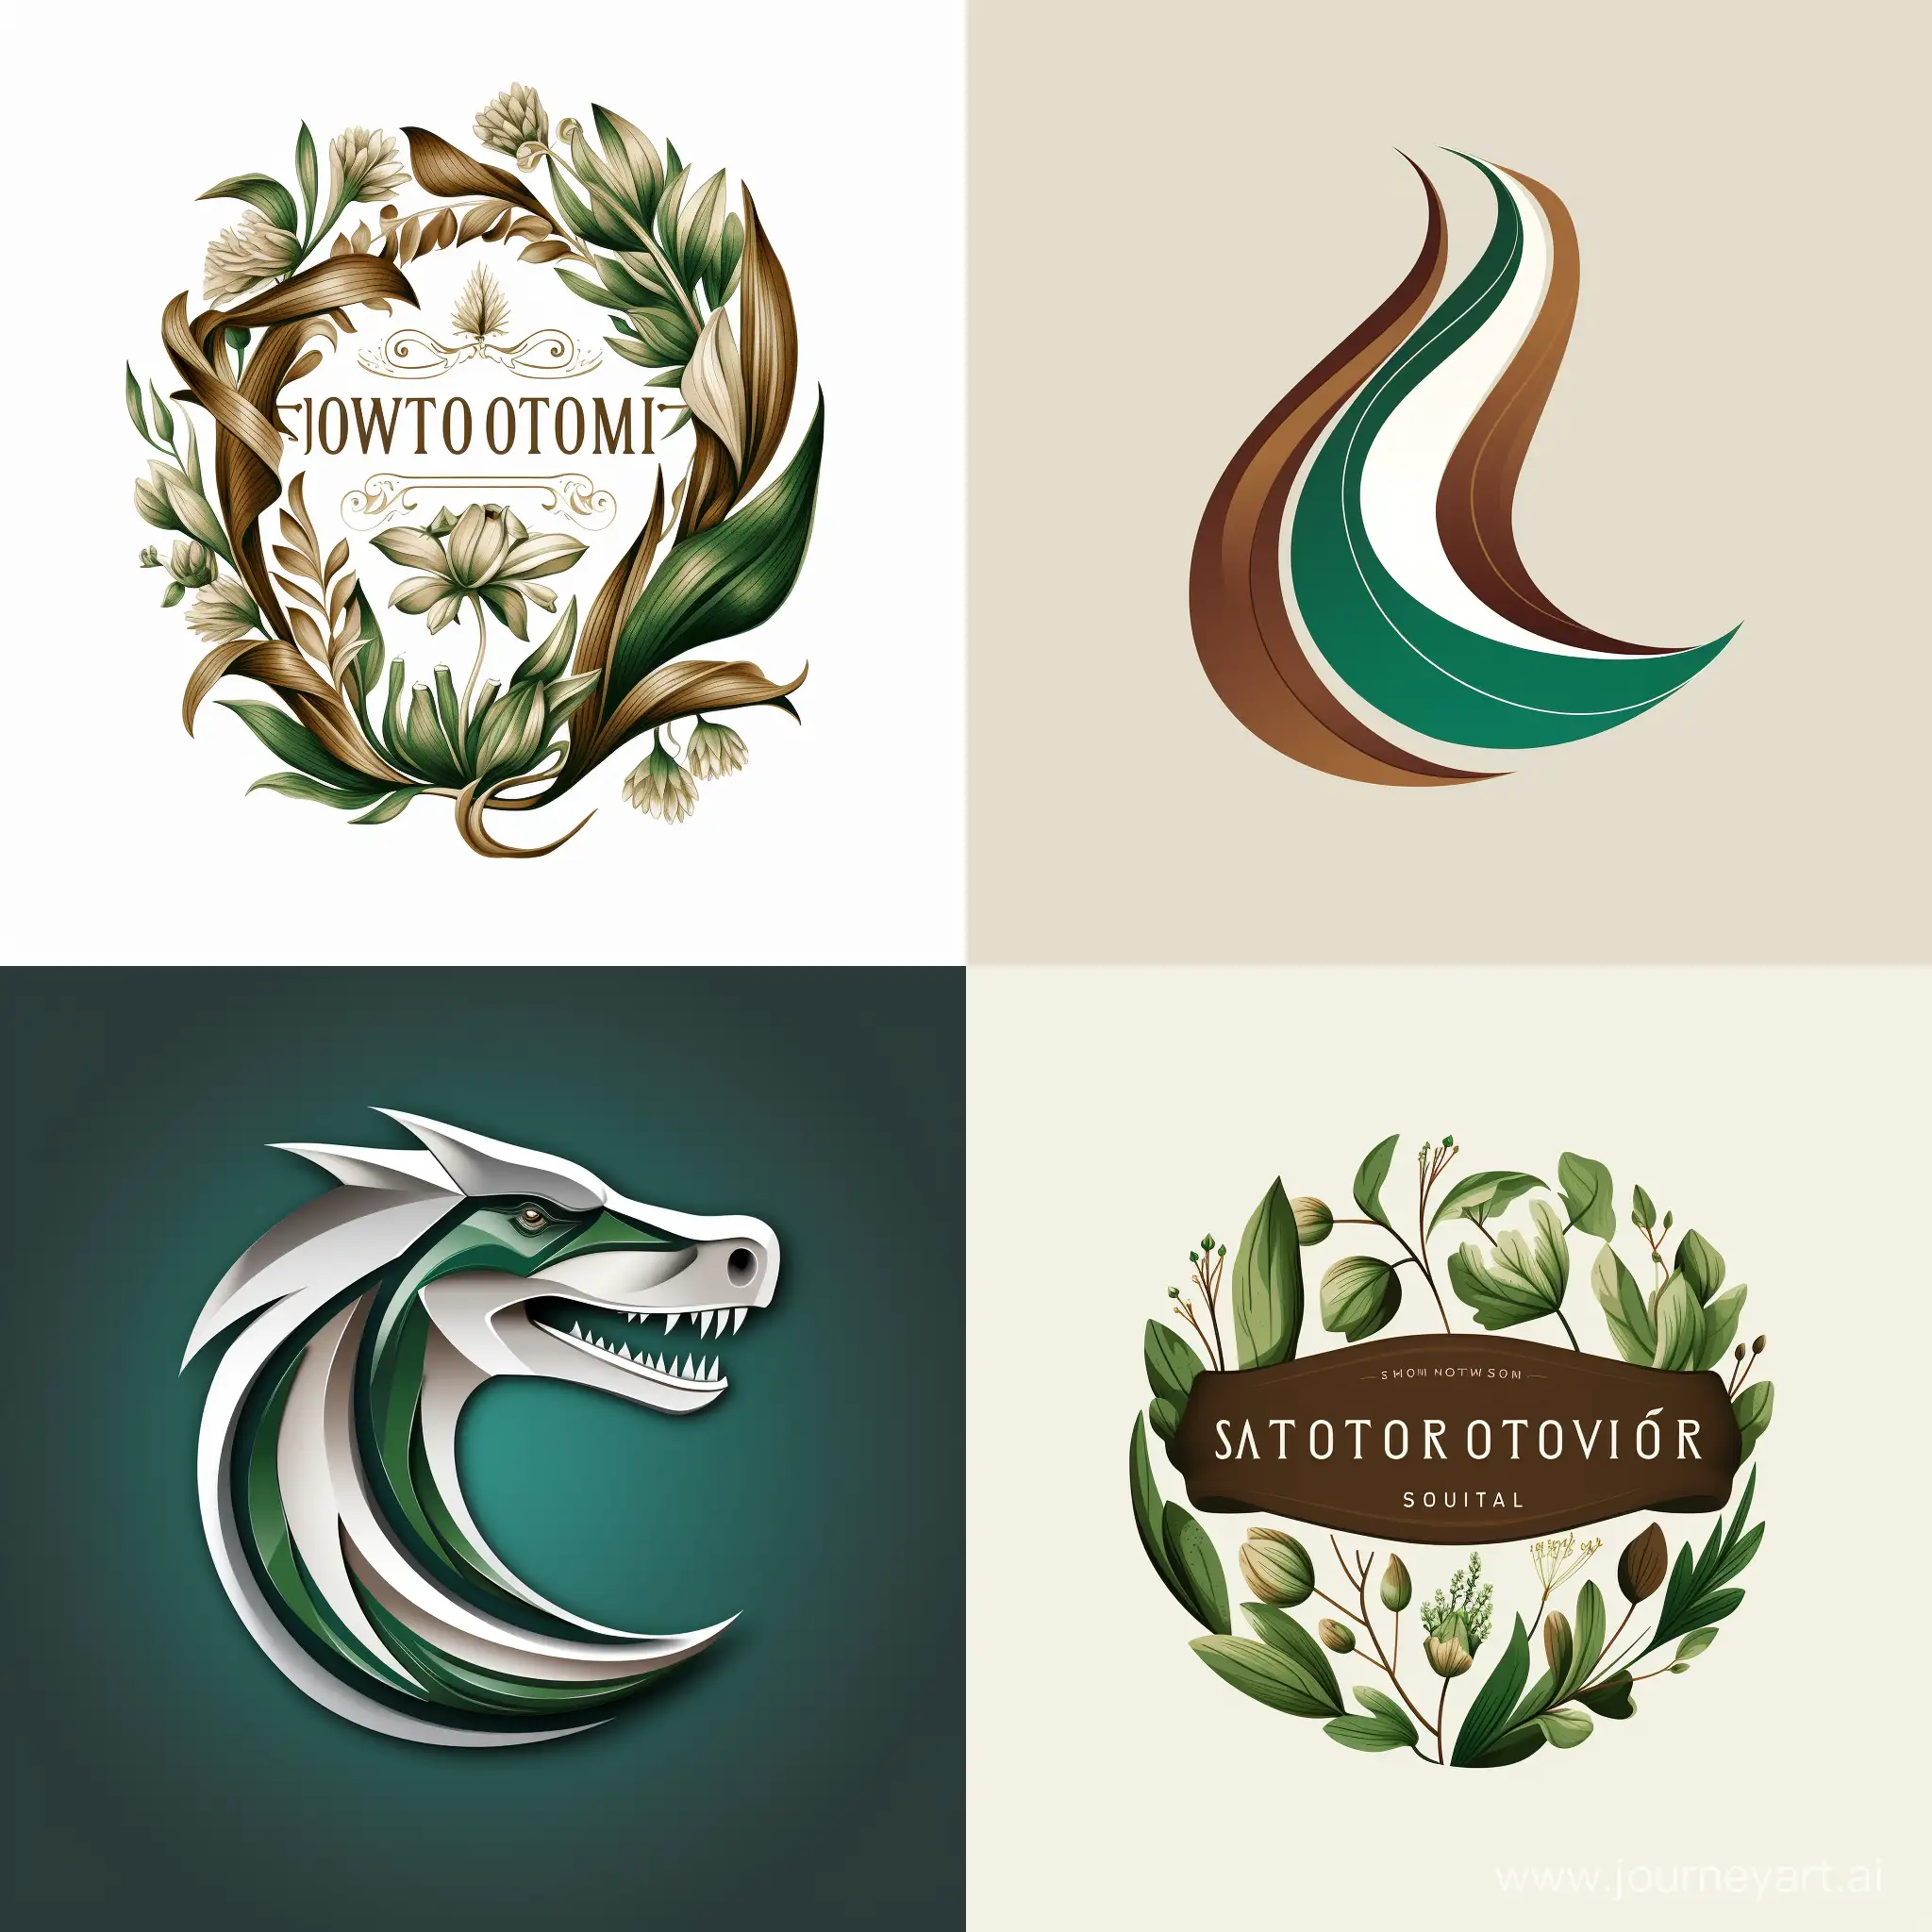 Professional-Dental-Care-Logo-in-Green-Brown-and-White